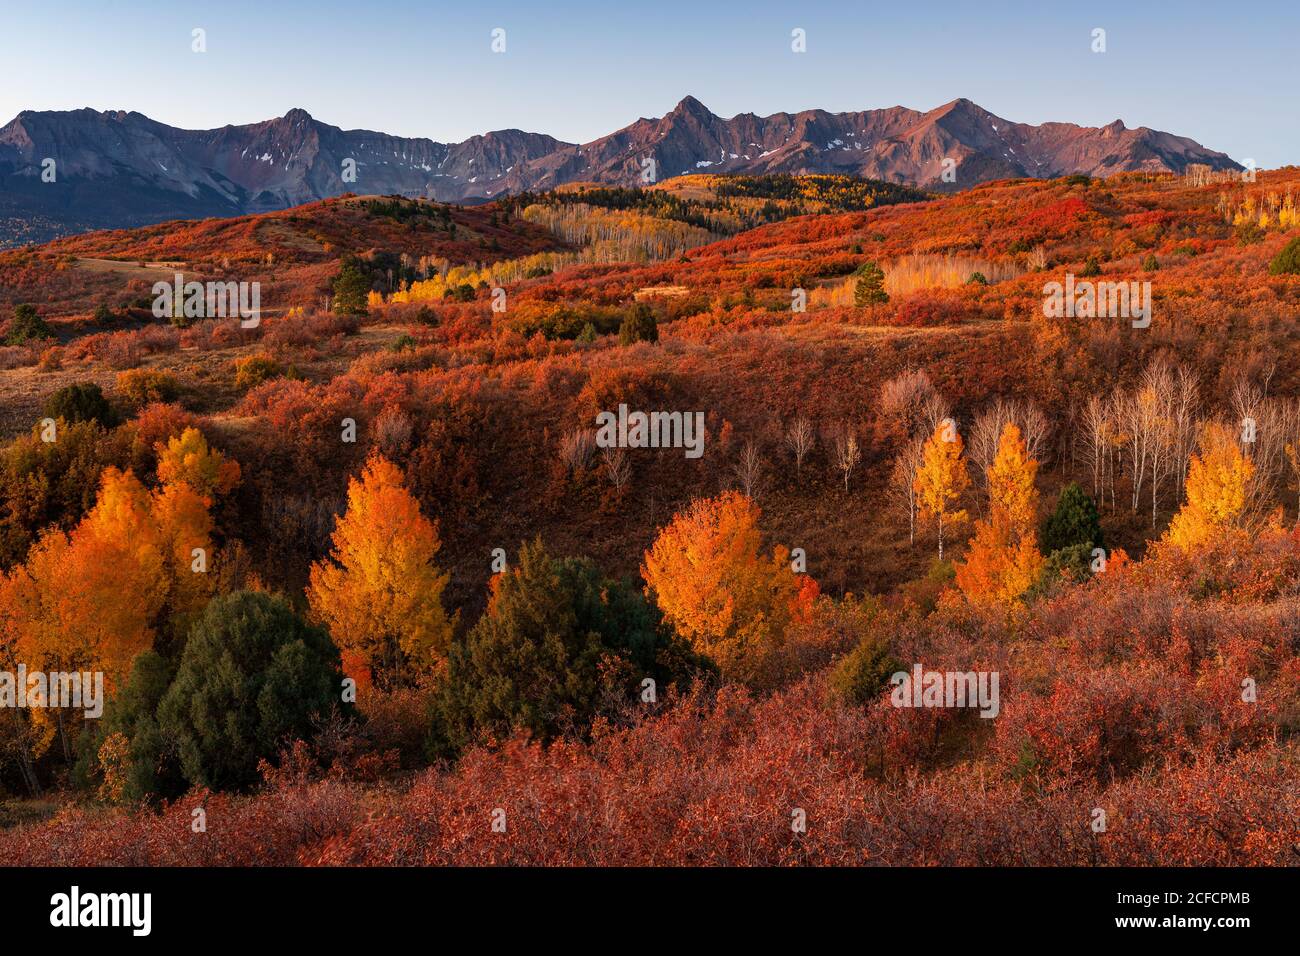 Dallas Divide scenic landscape with Aspen trees and fall colors in the San Juan Mountains, Colorado Stock Photo